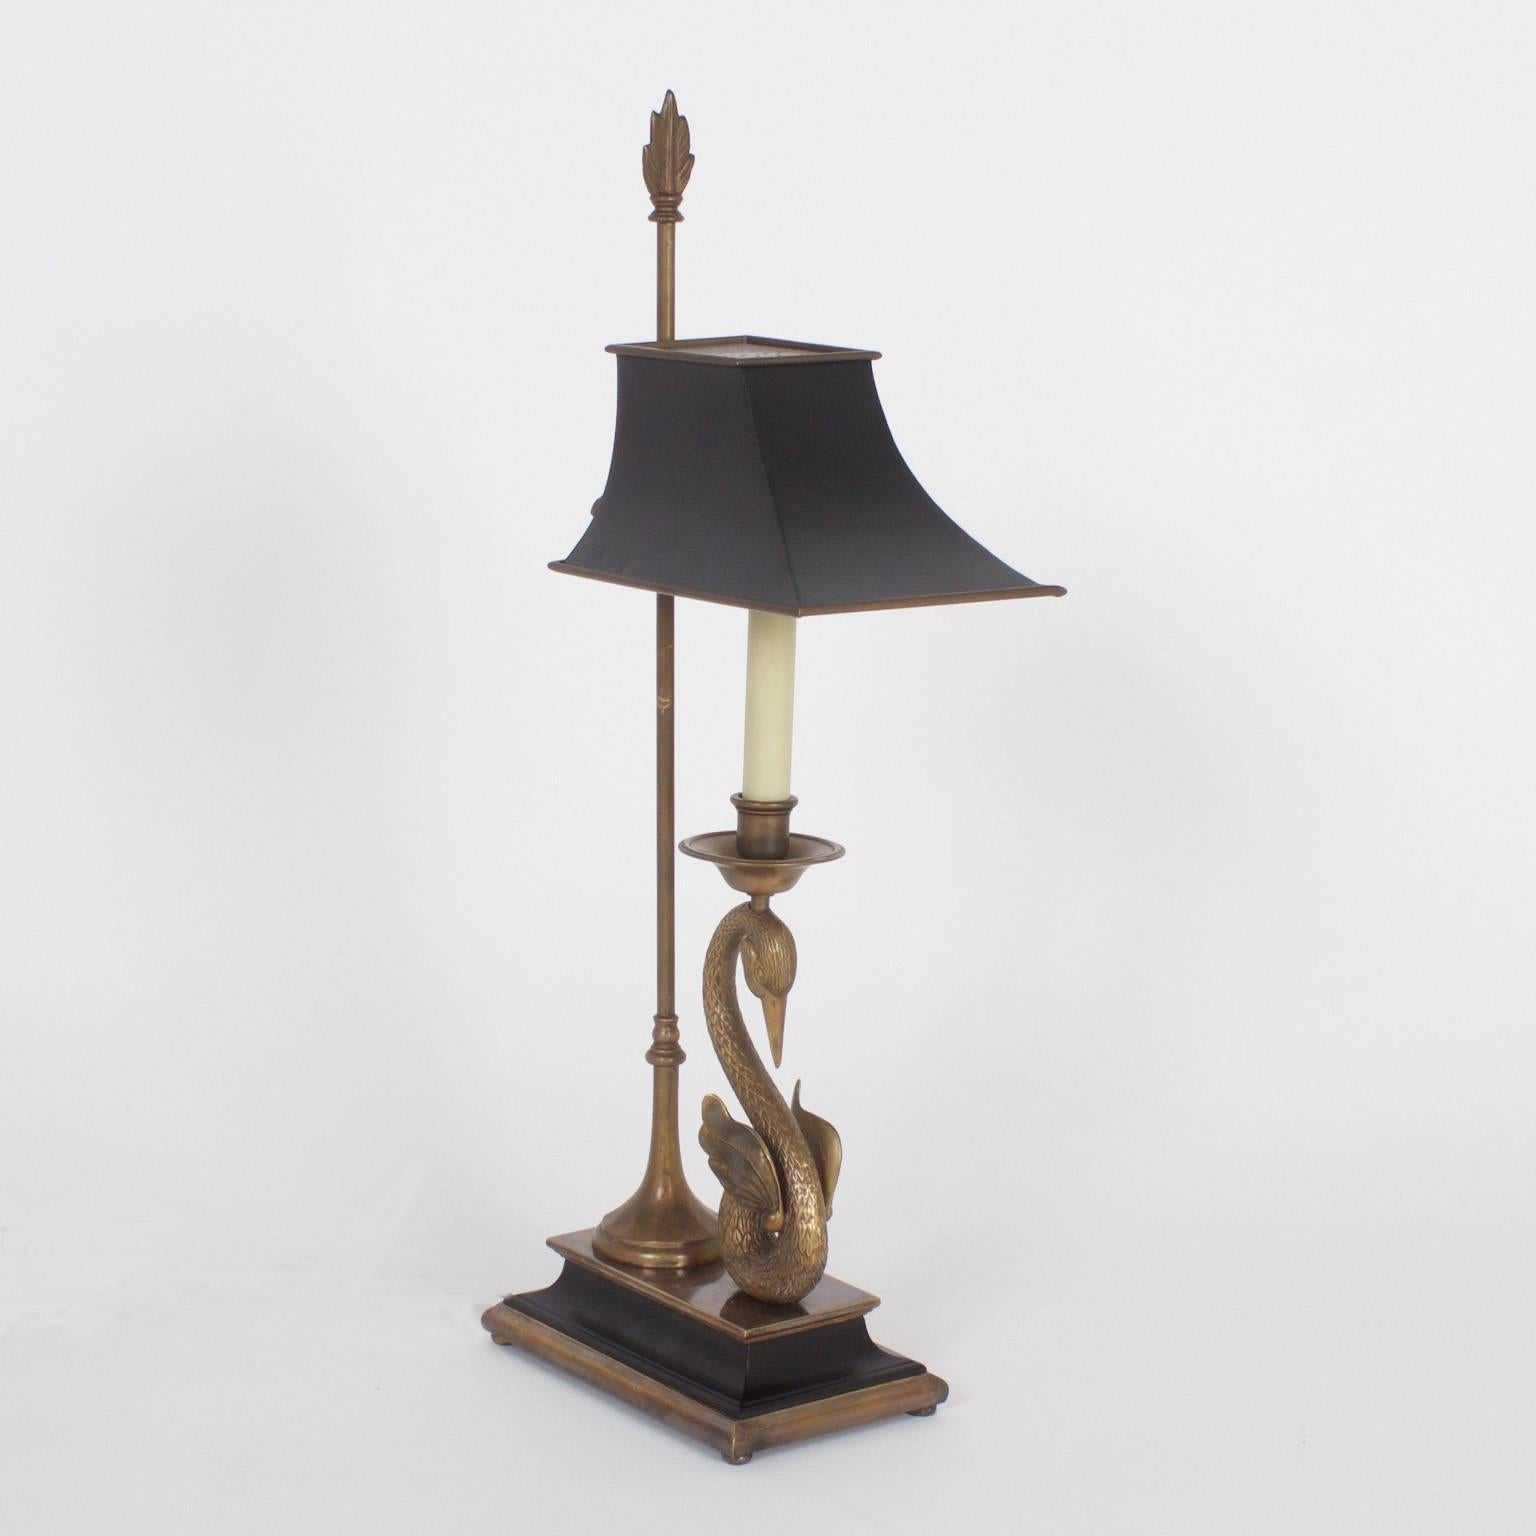 Rare and unusual French bouillotte or desk lamps with adjustable painted metal shades on a brass rod attached to a classical base. These handsome lamps feature cast brass swans with a mythological vibe. Newly wired.